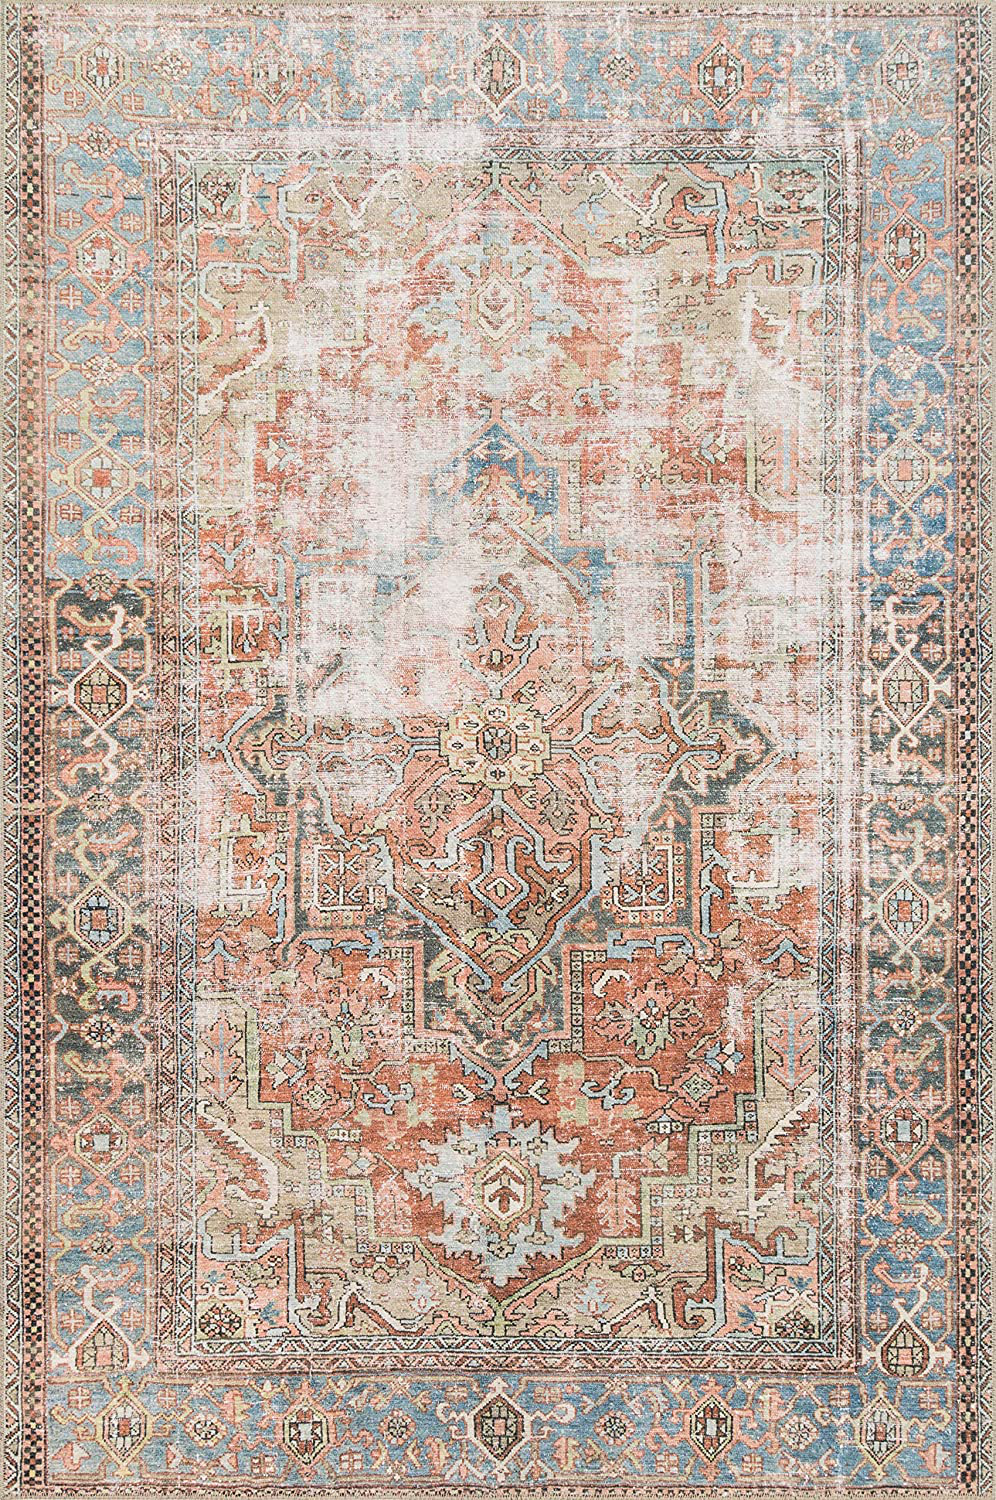 Loloi II Loren Collection Vintage Printed Persian Area Rug 1'-6" x 1'-6" Square Swatch Sand/Multi